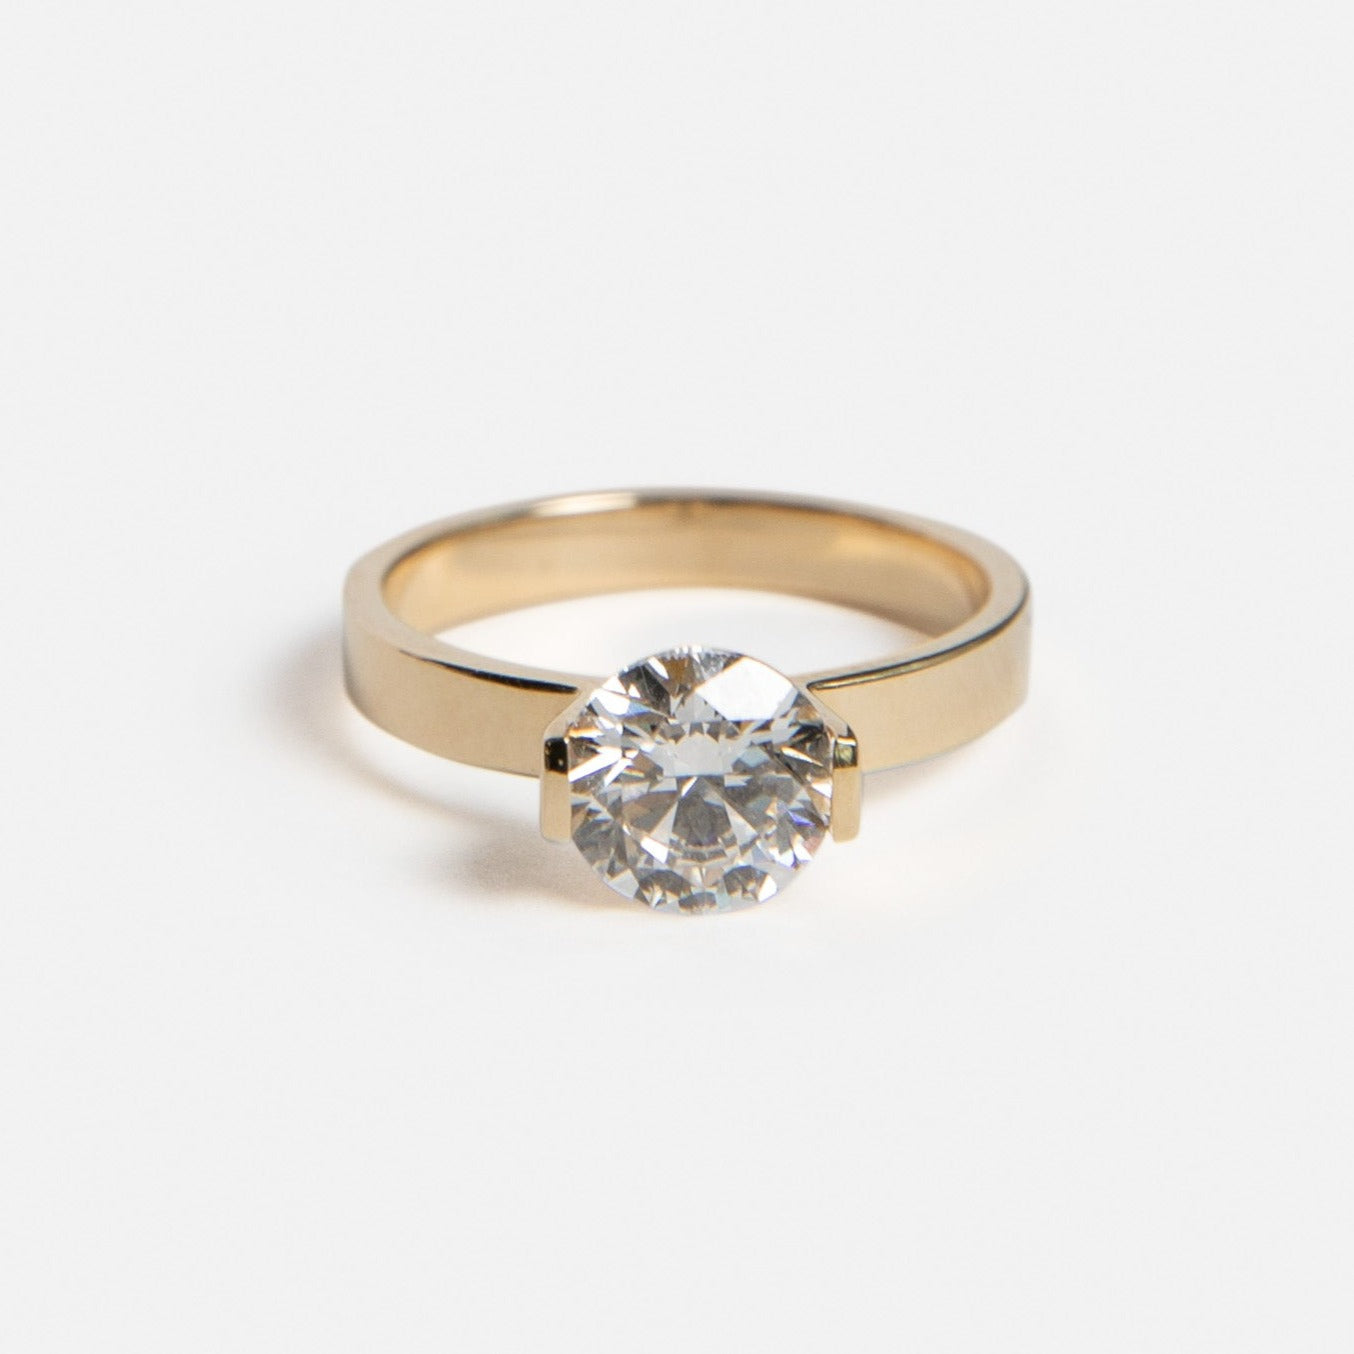 Lara Minimalist Engagement Ring in 14k Gold set with an excellent cut lab-grown diamond By SHW Fine Jewelry NYC